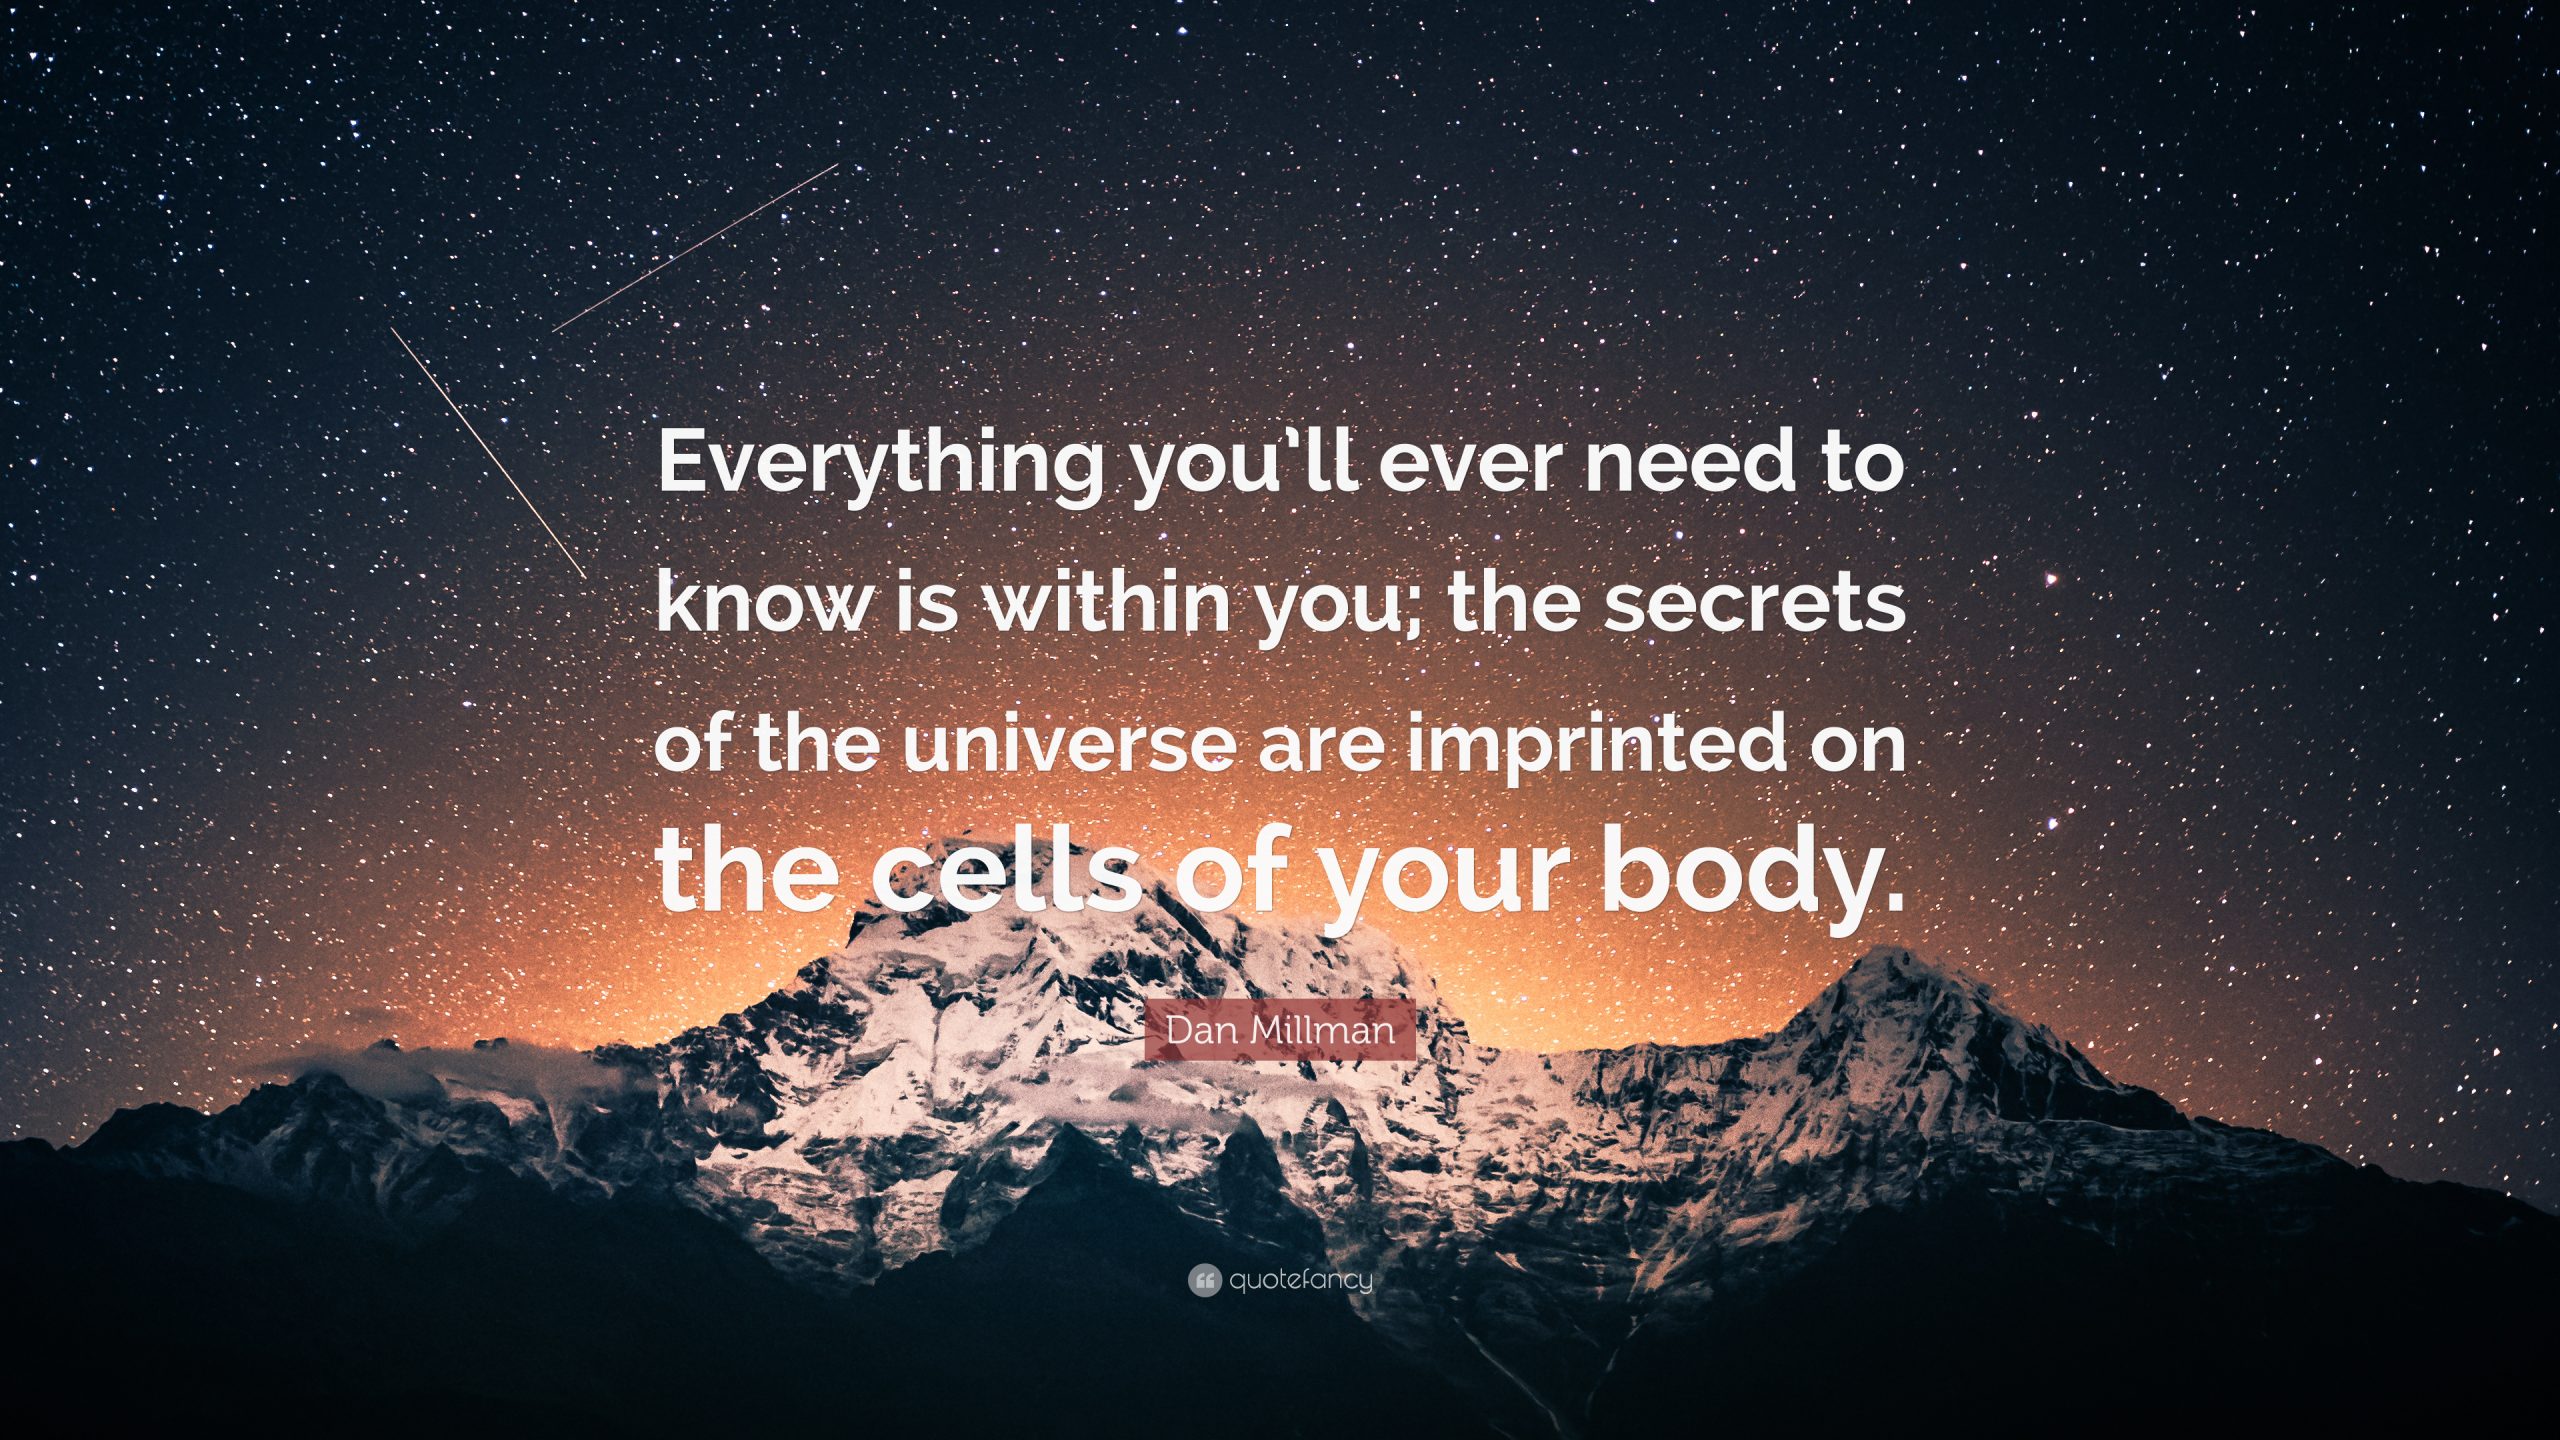 The secrets of the universe are within you